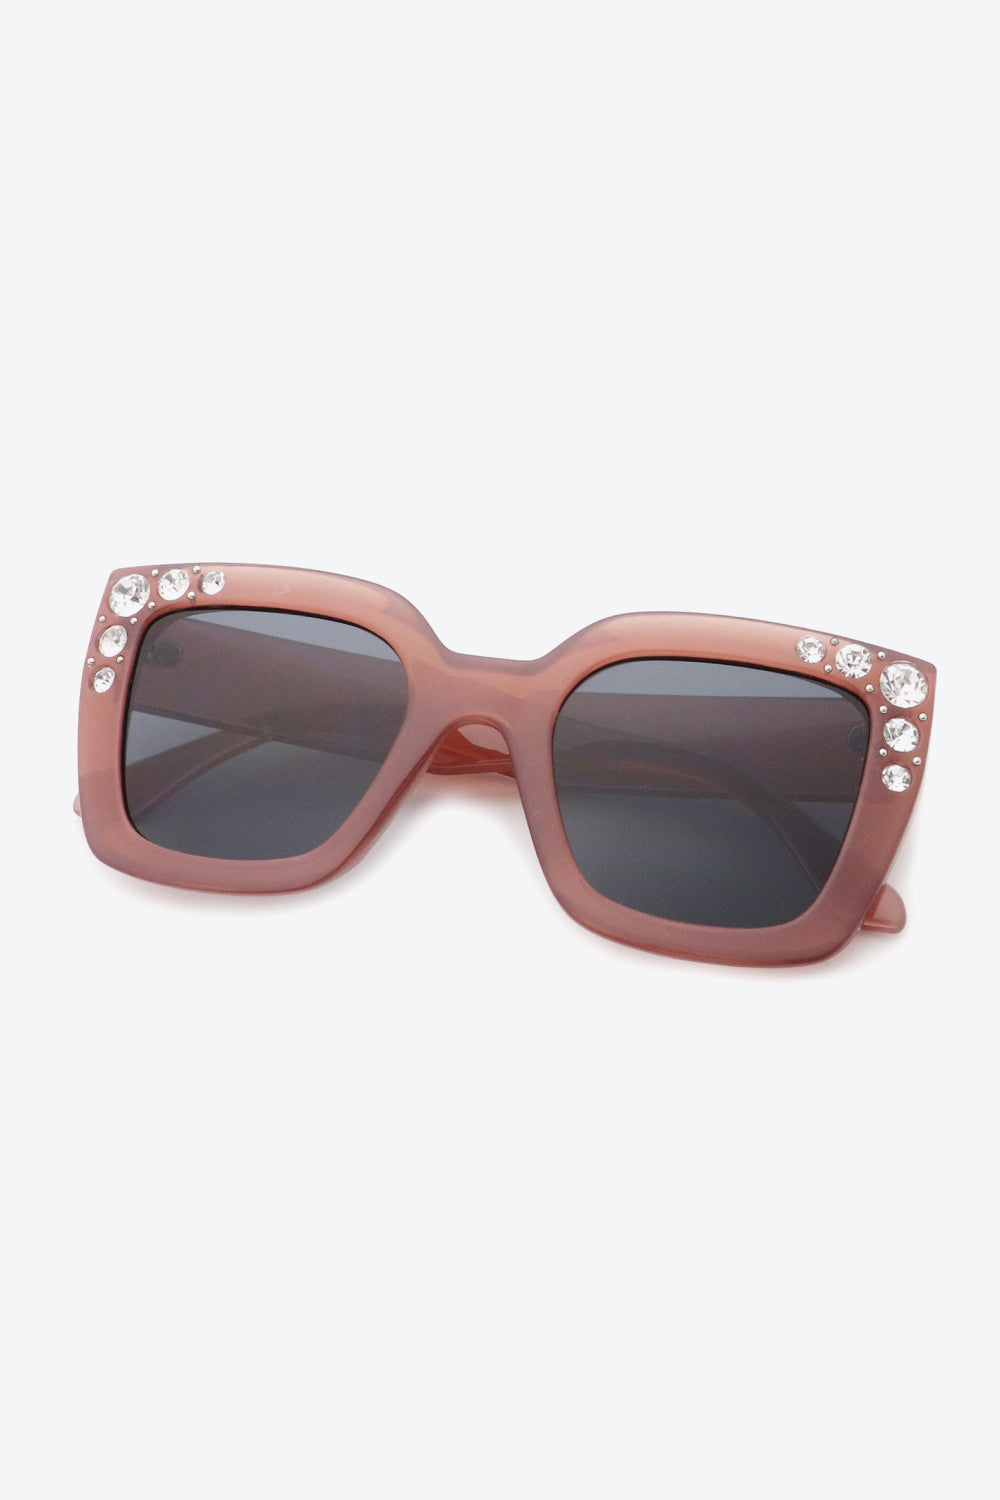 Gucci Star Embellished Havana Square Frame Sunglasses (All New  In,Accessories) IFCHIC.COM